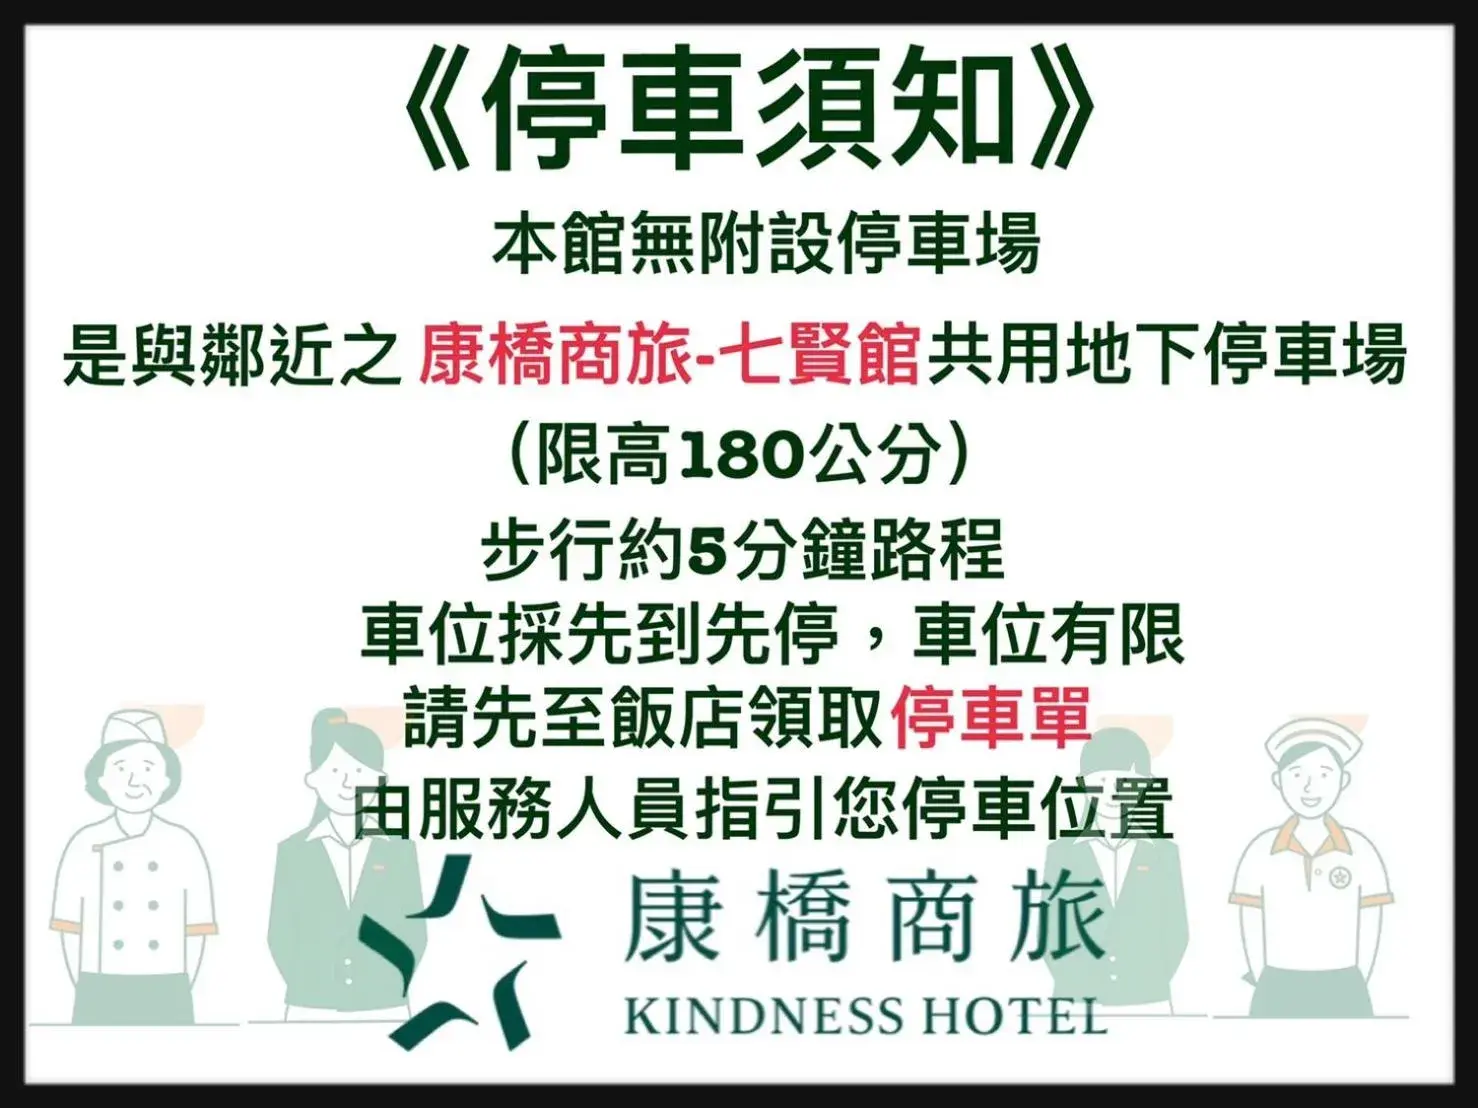 Parking in Kindness Hotel- Zhong Shan Bade